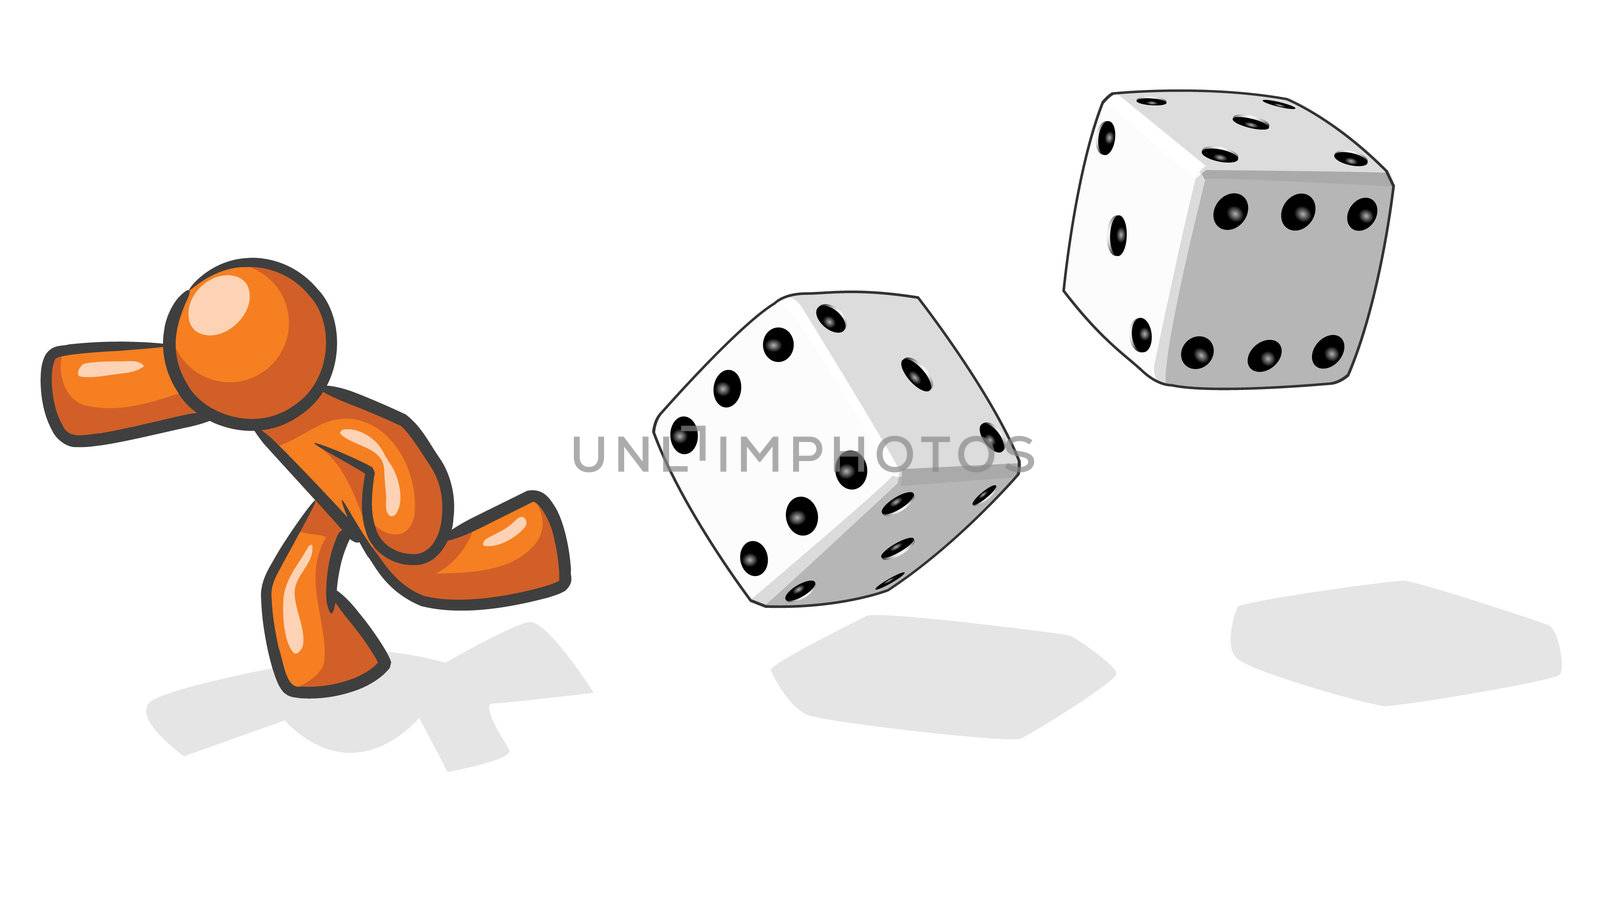 A design mascot running from giant dice, based on the saying "victim of chance".